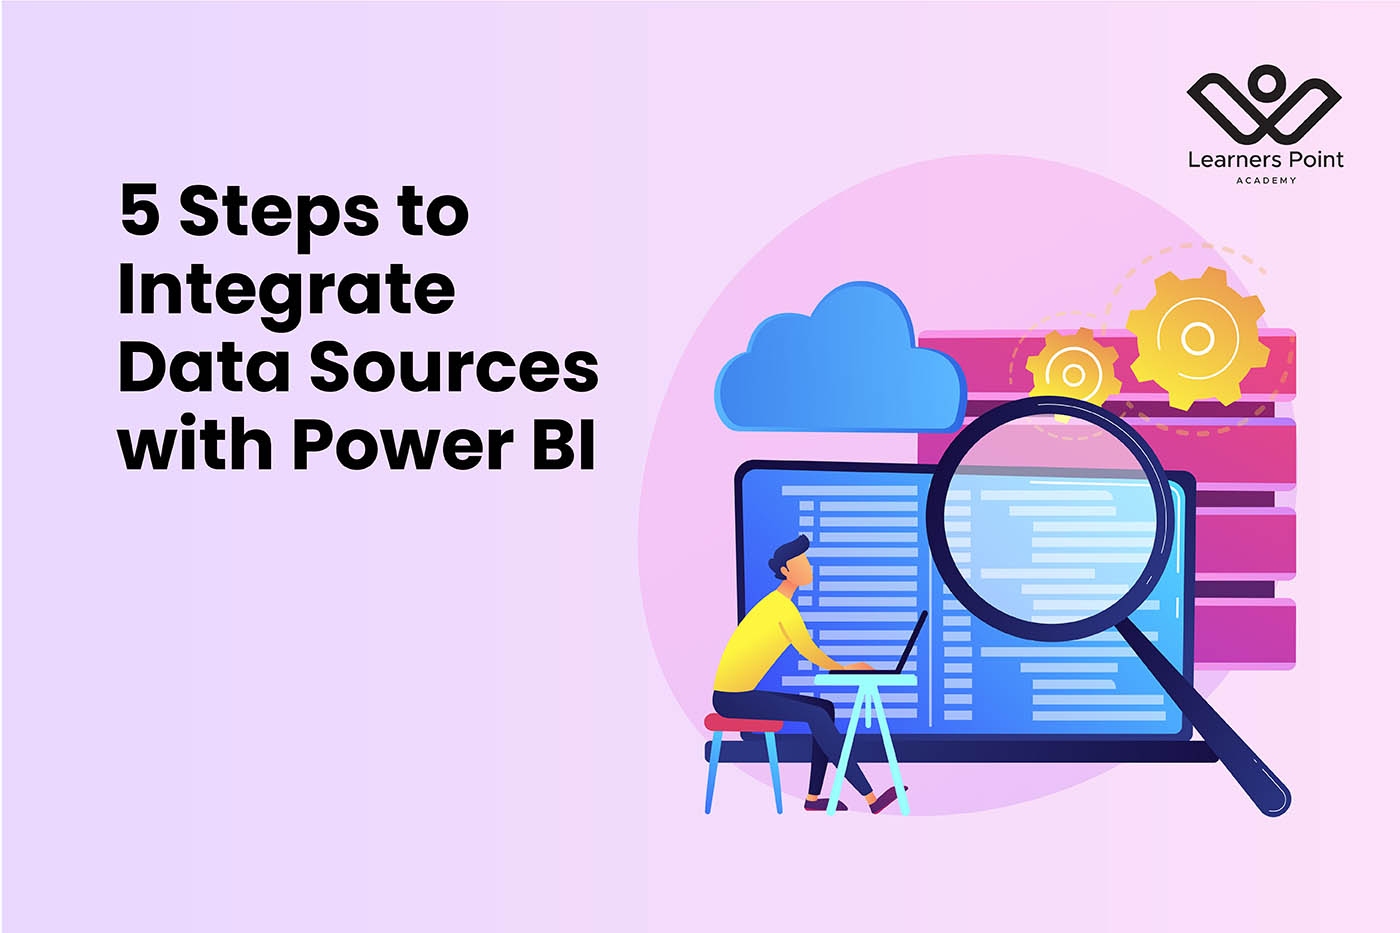 5 Steps to Integrate Data Sources with Power BI